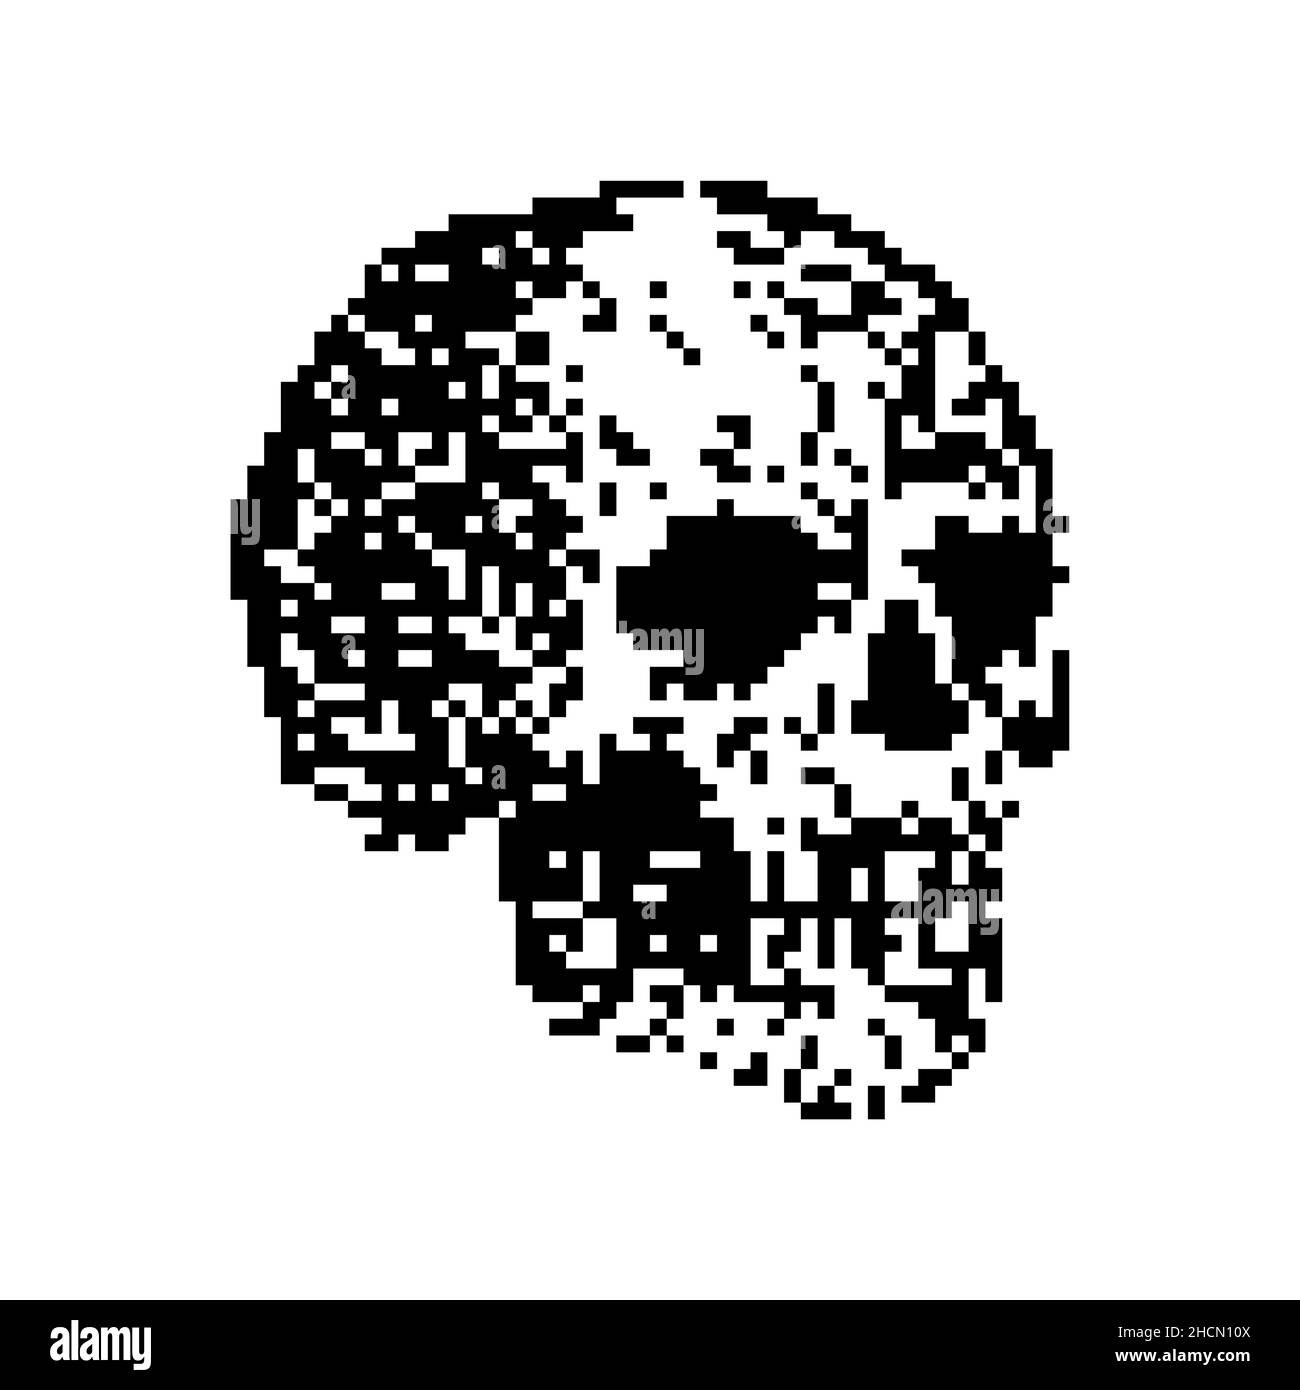 Pixel skull Black and White Stock Photos & Images - Alamy